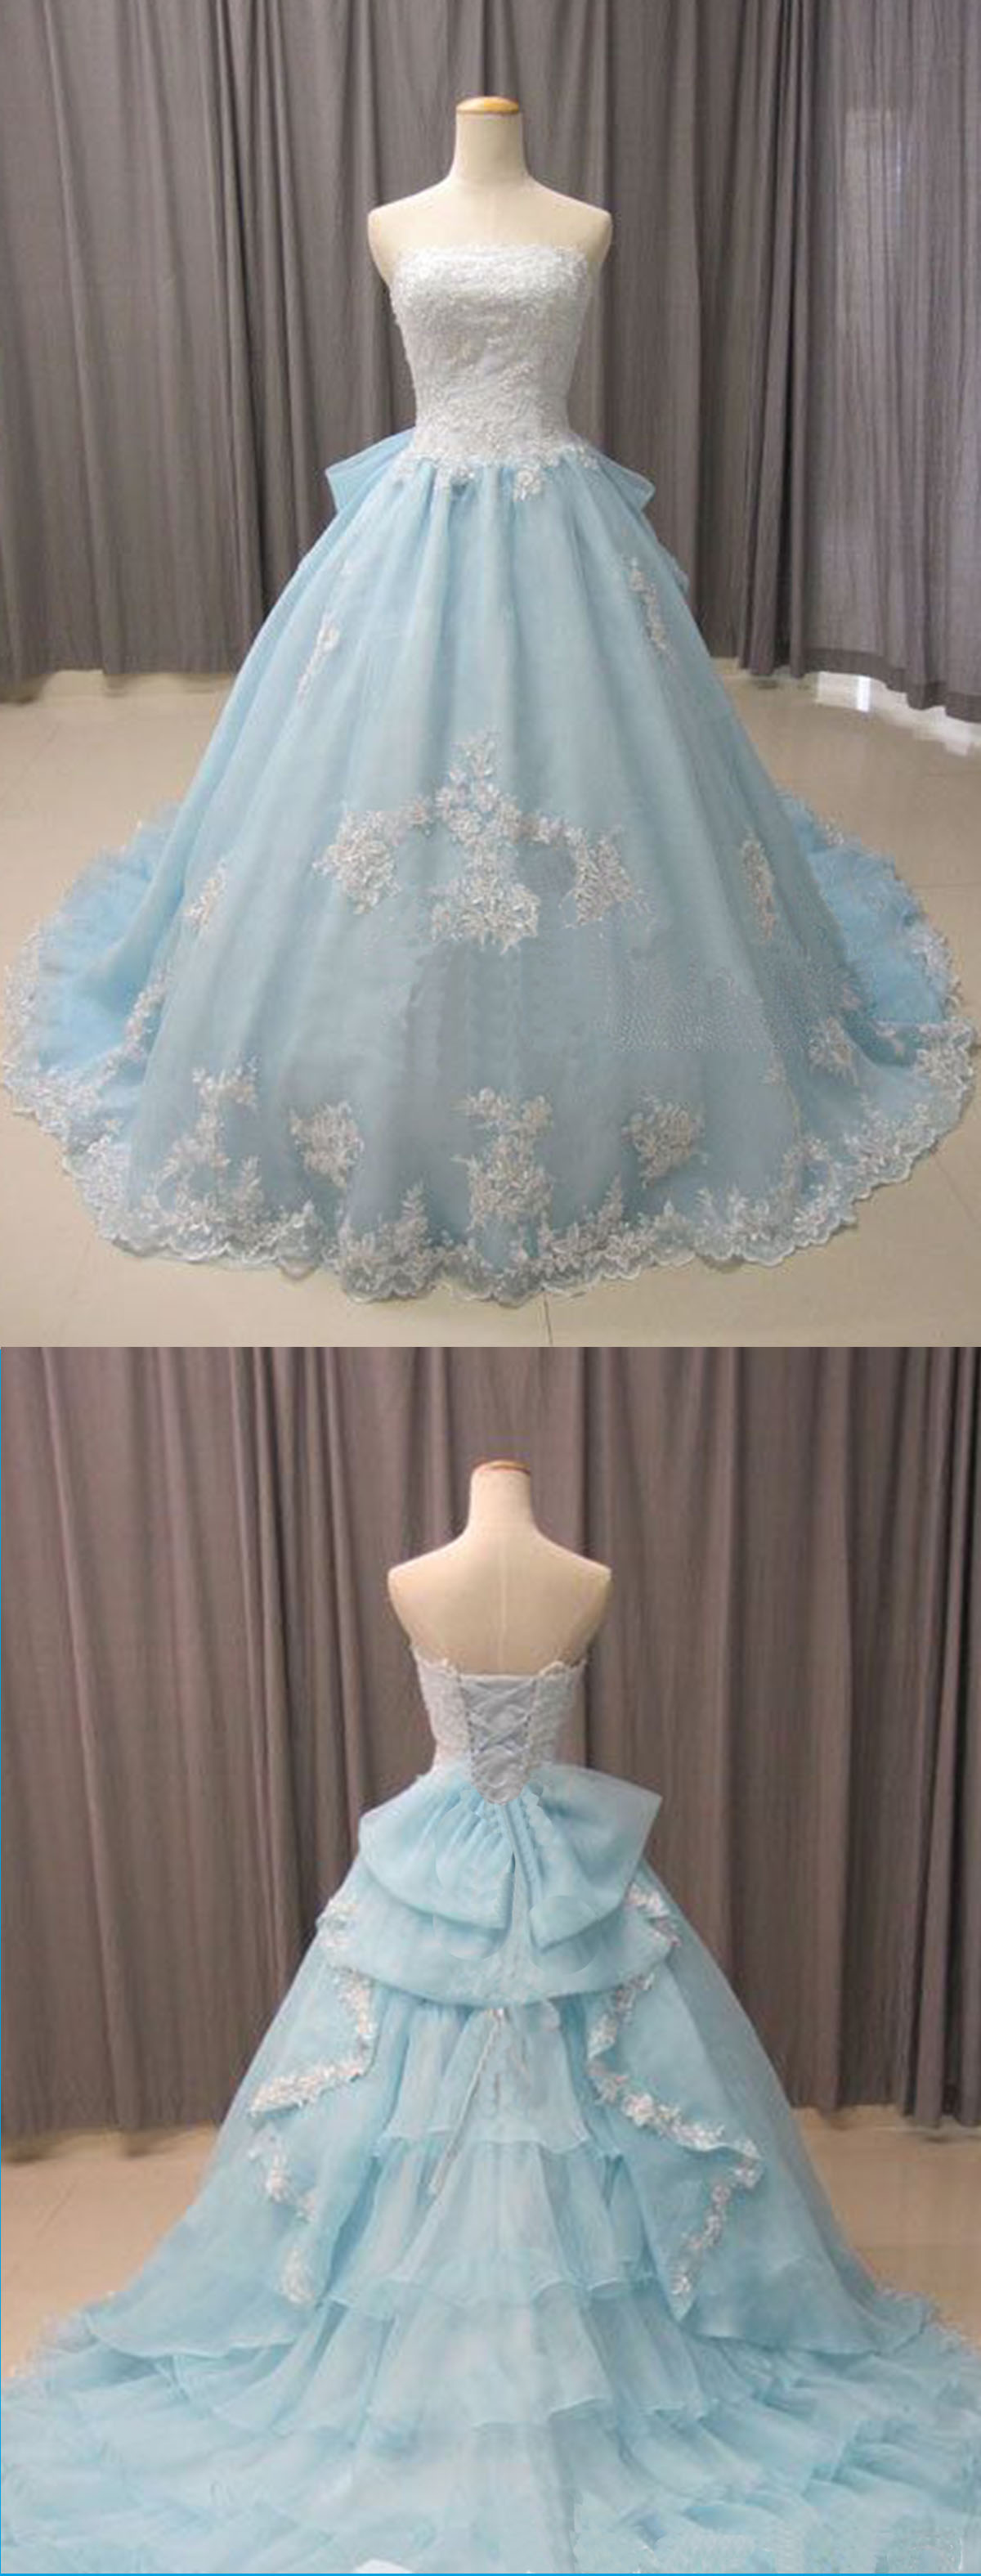 Blue Tulle Strapless Long Train Lace Formal Prom Dress, Evening Dress ...